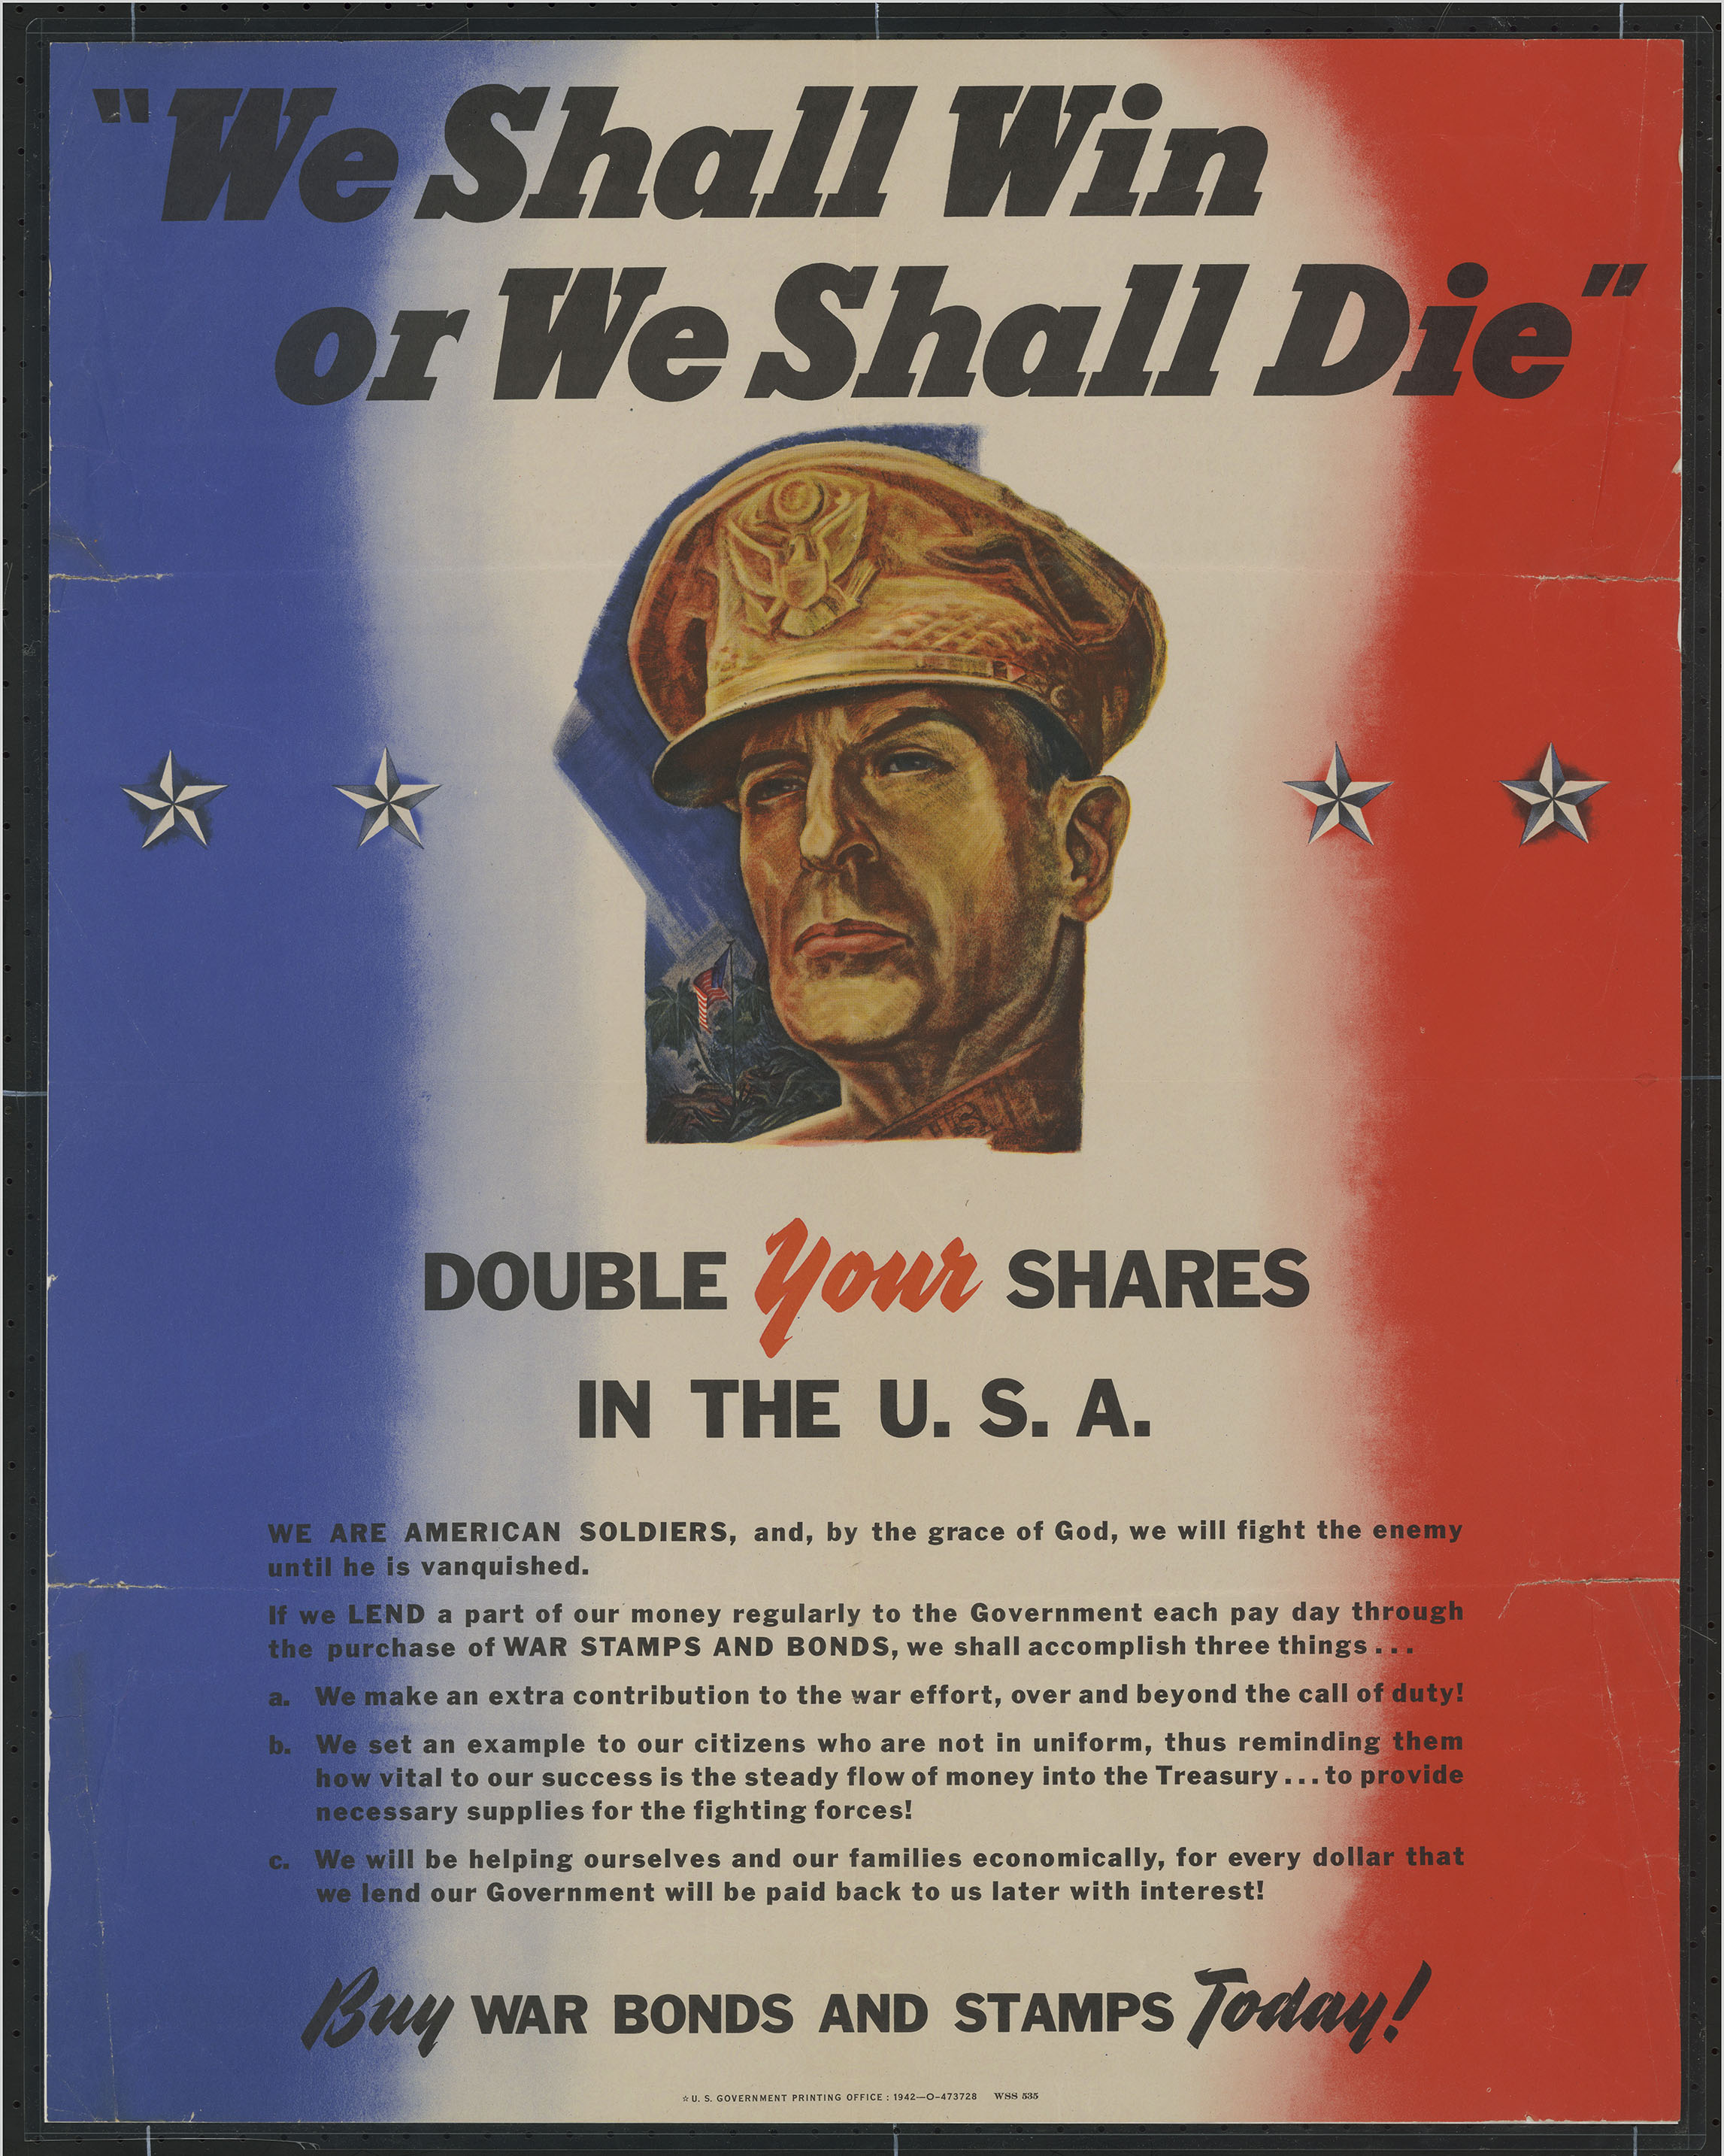 1942 War Bonds Poster. "We Shall Win Or We Shall Die": Double Your Shares In the U.S.A. ... Buy War Bonds and Stamps Today!. Washington, D.C.: U.S. Government Printing Office, 1942.  (Poster 1942 .W4) This 1942 propaganda poster advertises the sale of war bonds as a way for people at home to contribute to the war effort. Since World War II was a “total war,” patriotic propaganda was used to garner support for the war on the American home front. The poster’s language serves to unite soldiers with civilians back home in a combined revenue-raising effort that both financially and morally supports the war 